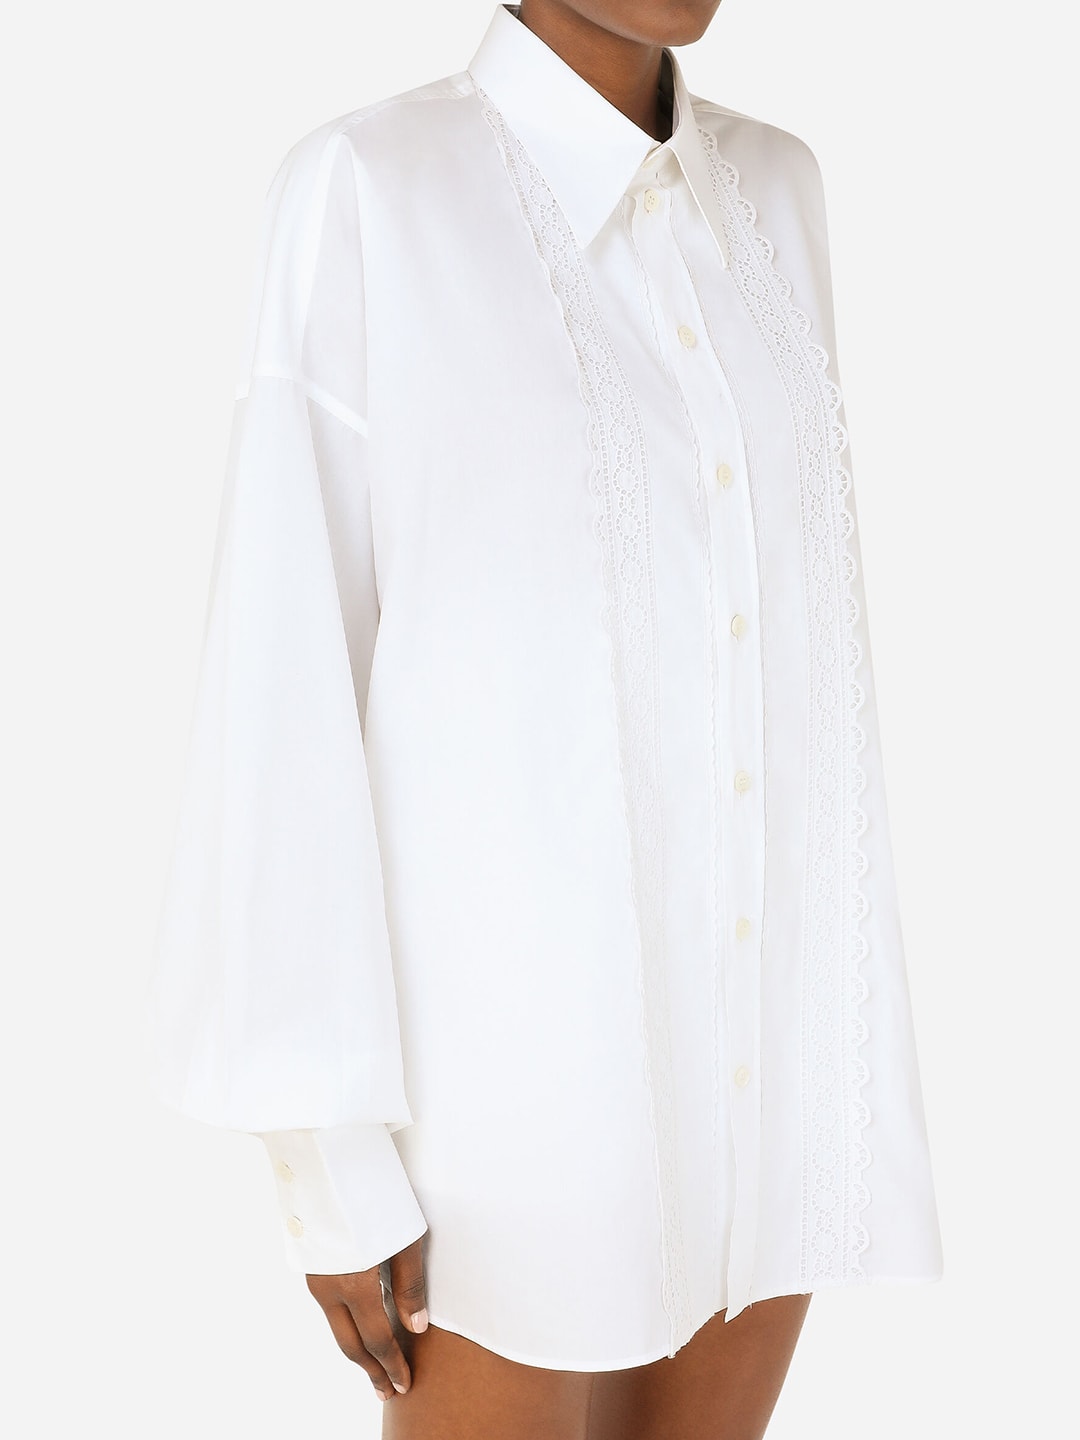 Dolce & Gabbana Broderie Anglaise Detailing Shirt | italist 